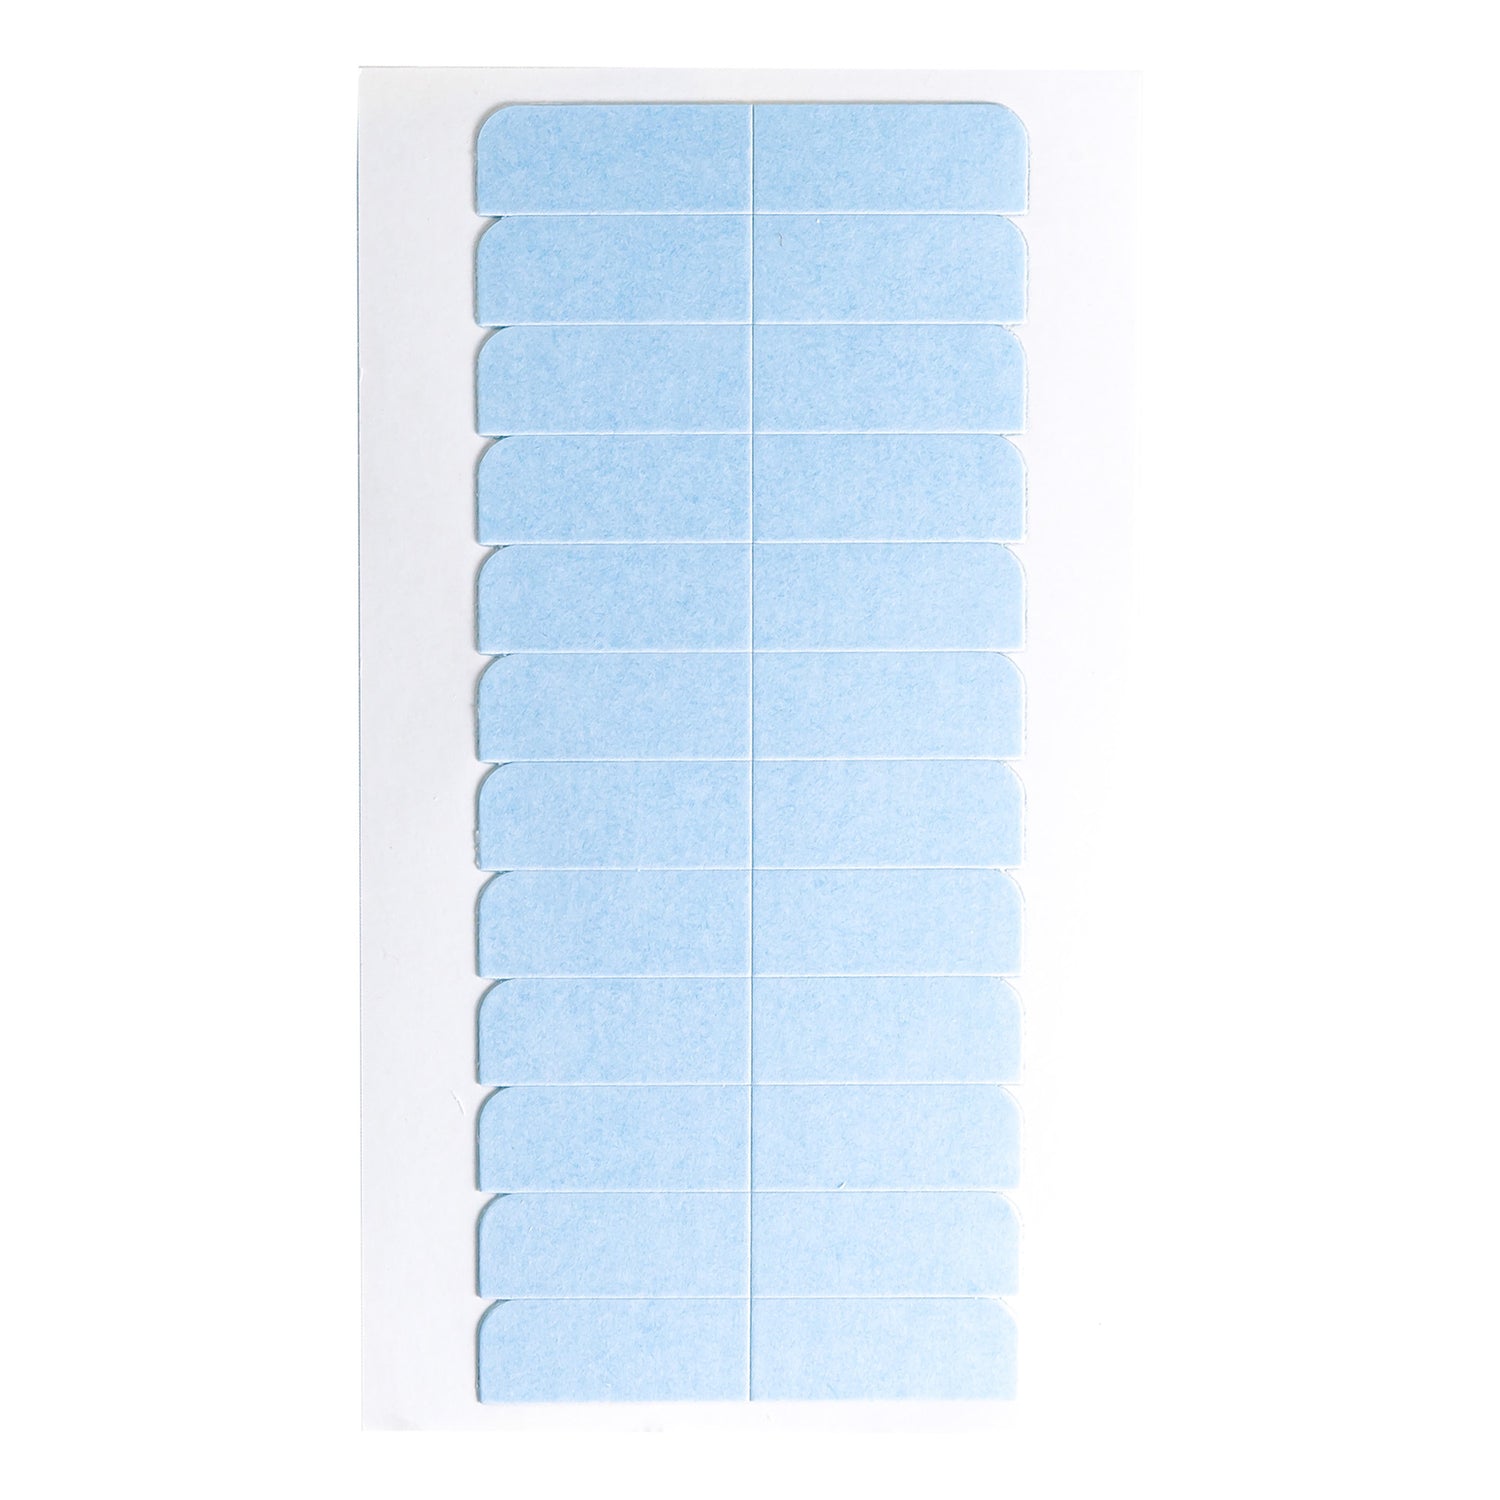 A single sheet of Big Kizzy® Classic Blue Double Sided Hair Extension Replacement Tape Tabs